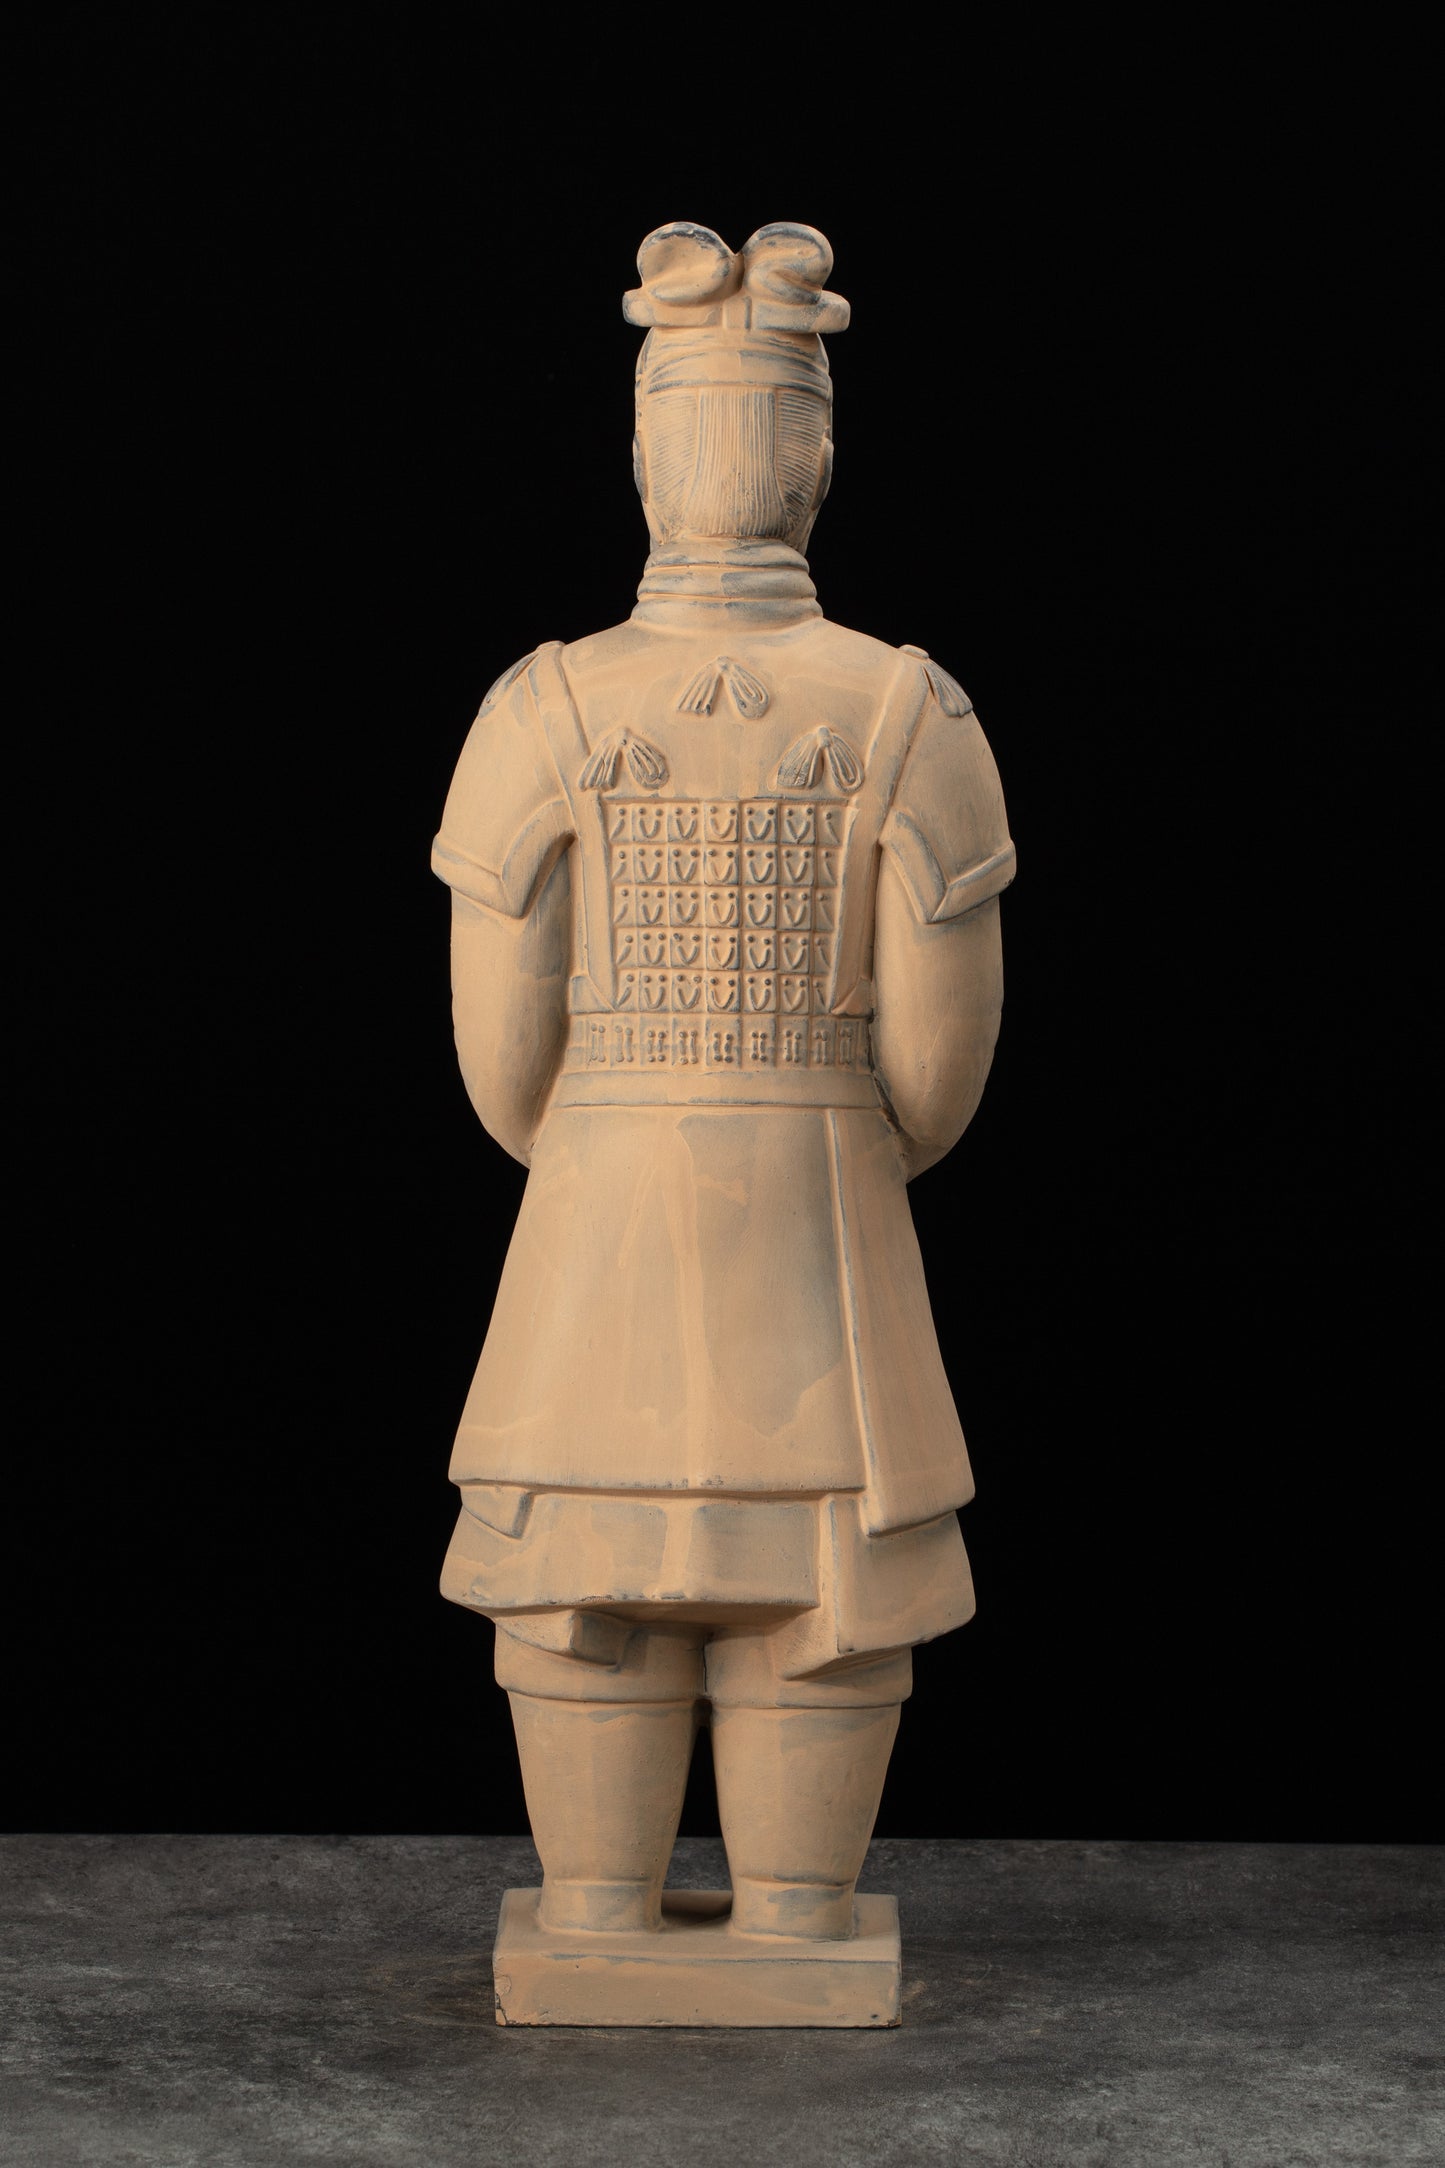 55CM General - CLAYARMY-Majestic Authority: Explore the majestic authority in the 55CM General replica, highlighting meticulous sculpting of historical uniforms and accessories.